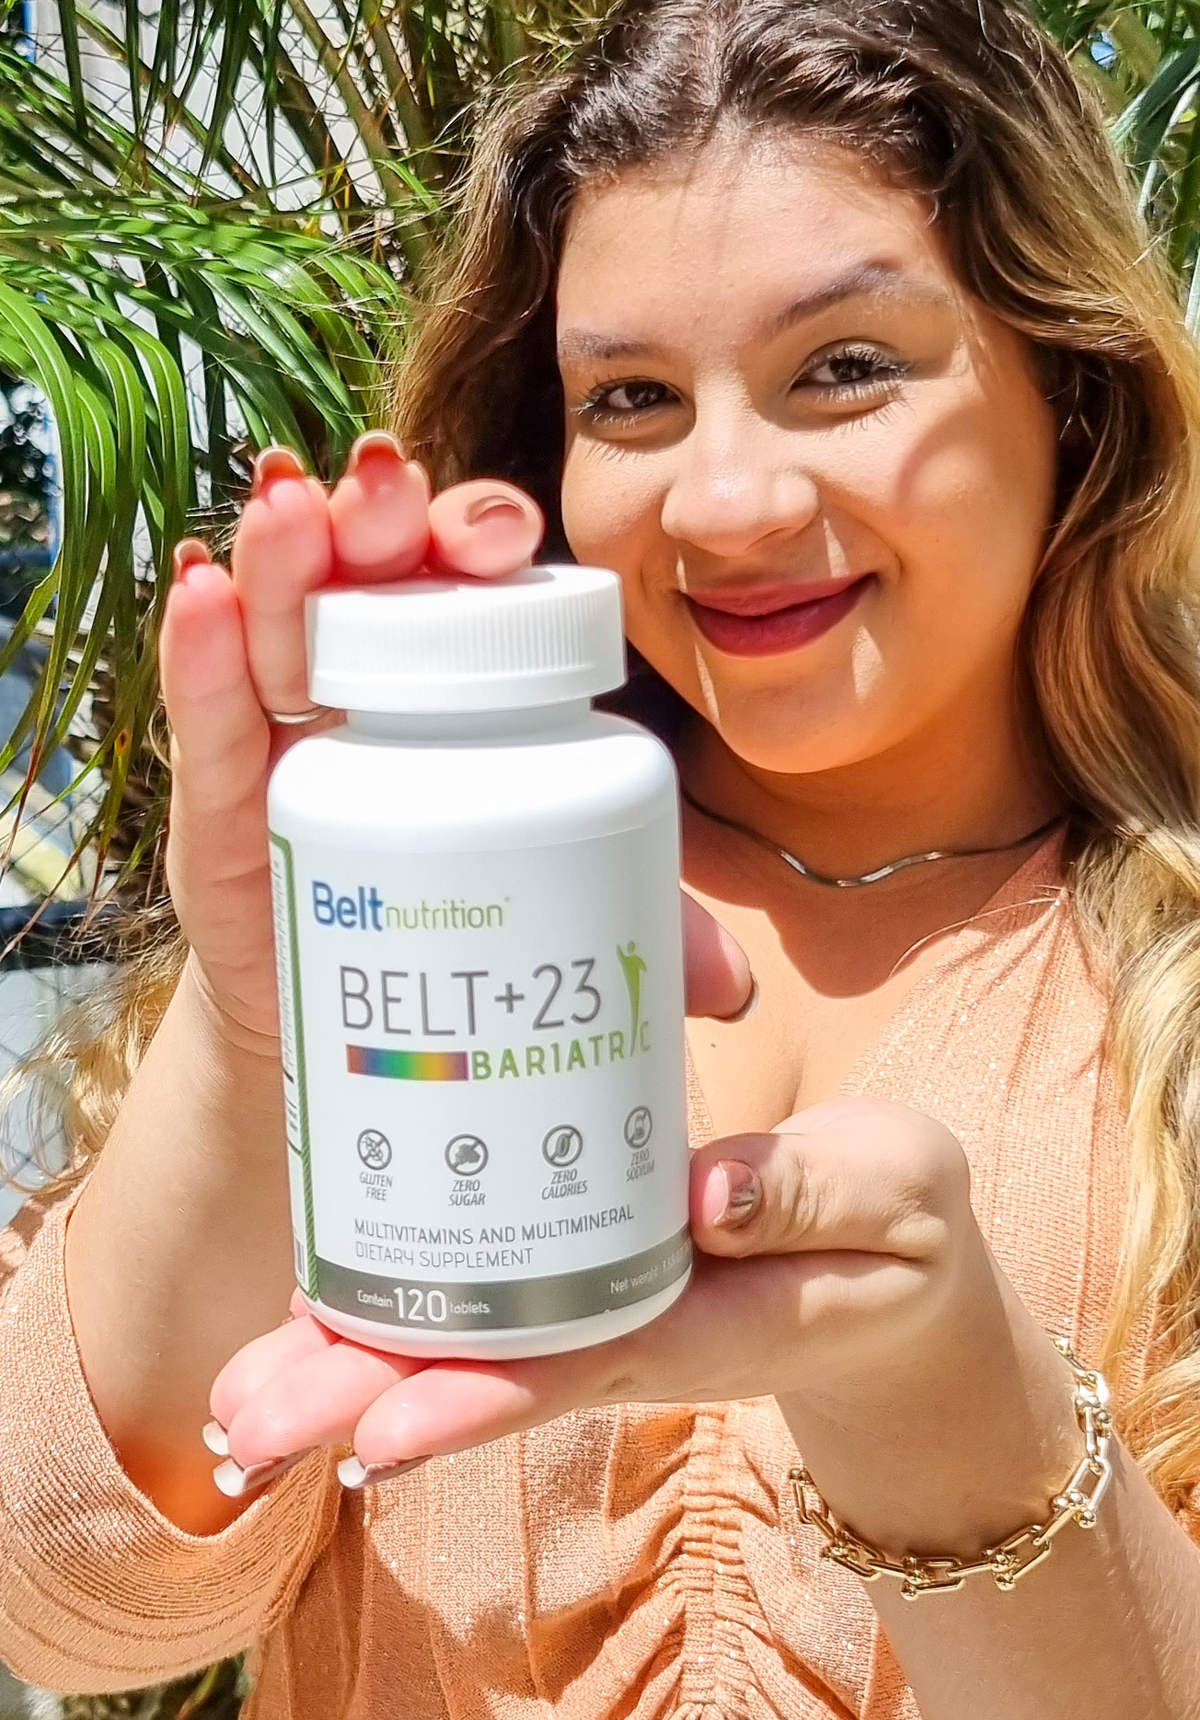 Belt +23 Bariatric Multivitamin and Multimineral Tablets (Gastric Bypass, Sleeve Gastrectomy) with Iron - No Flavor - 1 Month Supply